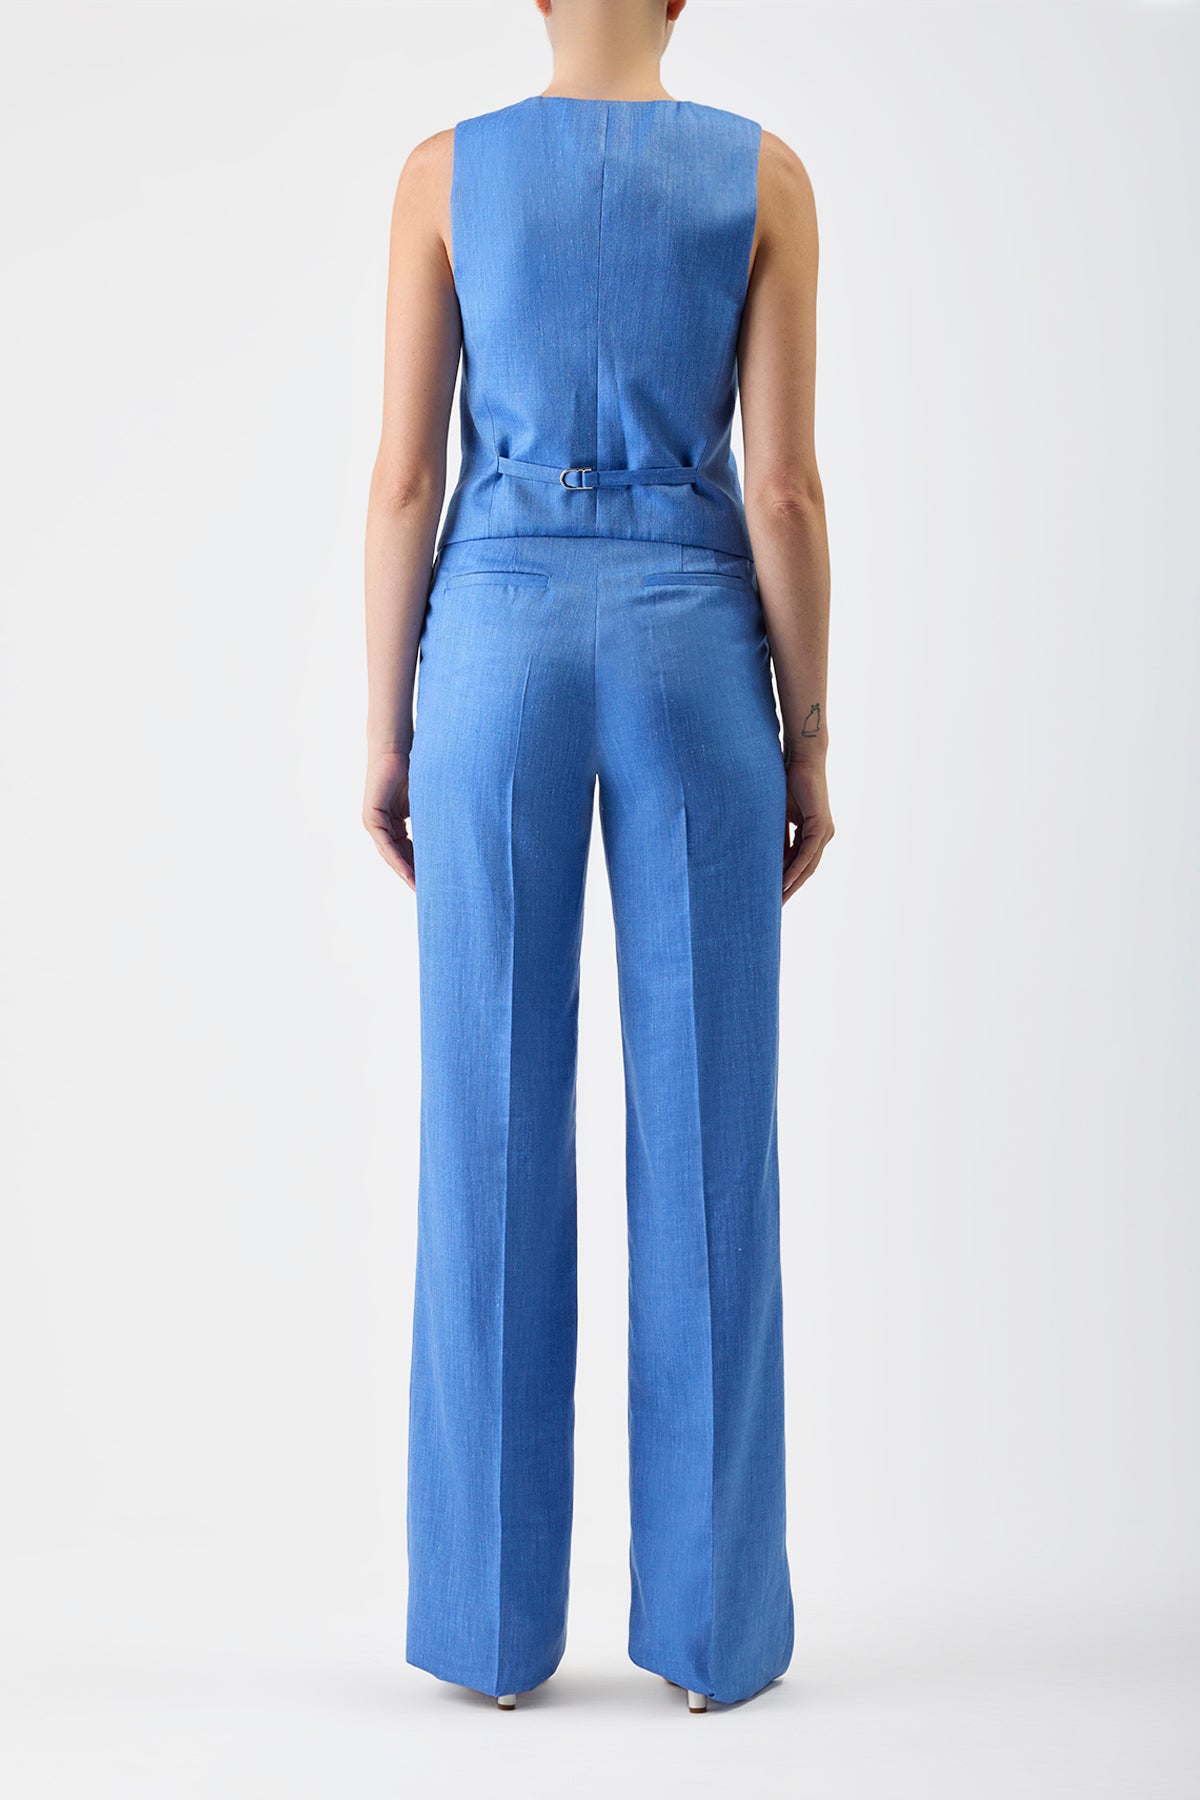 Vesta Pant in Sapphire Silk Wool and Linen